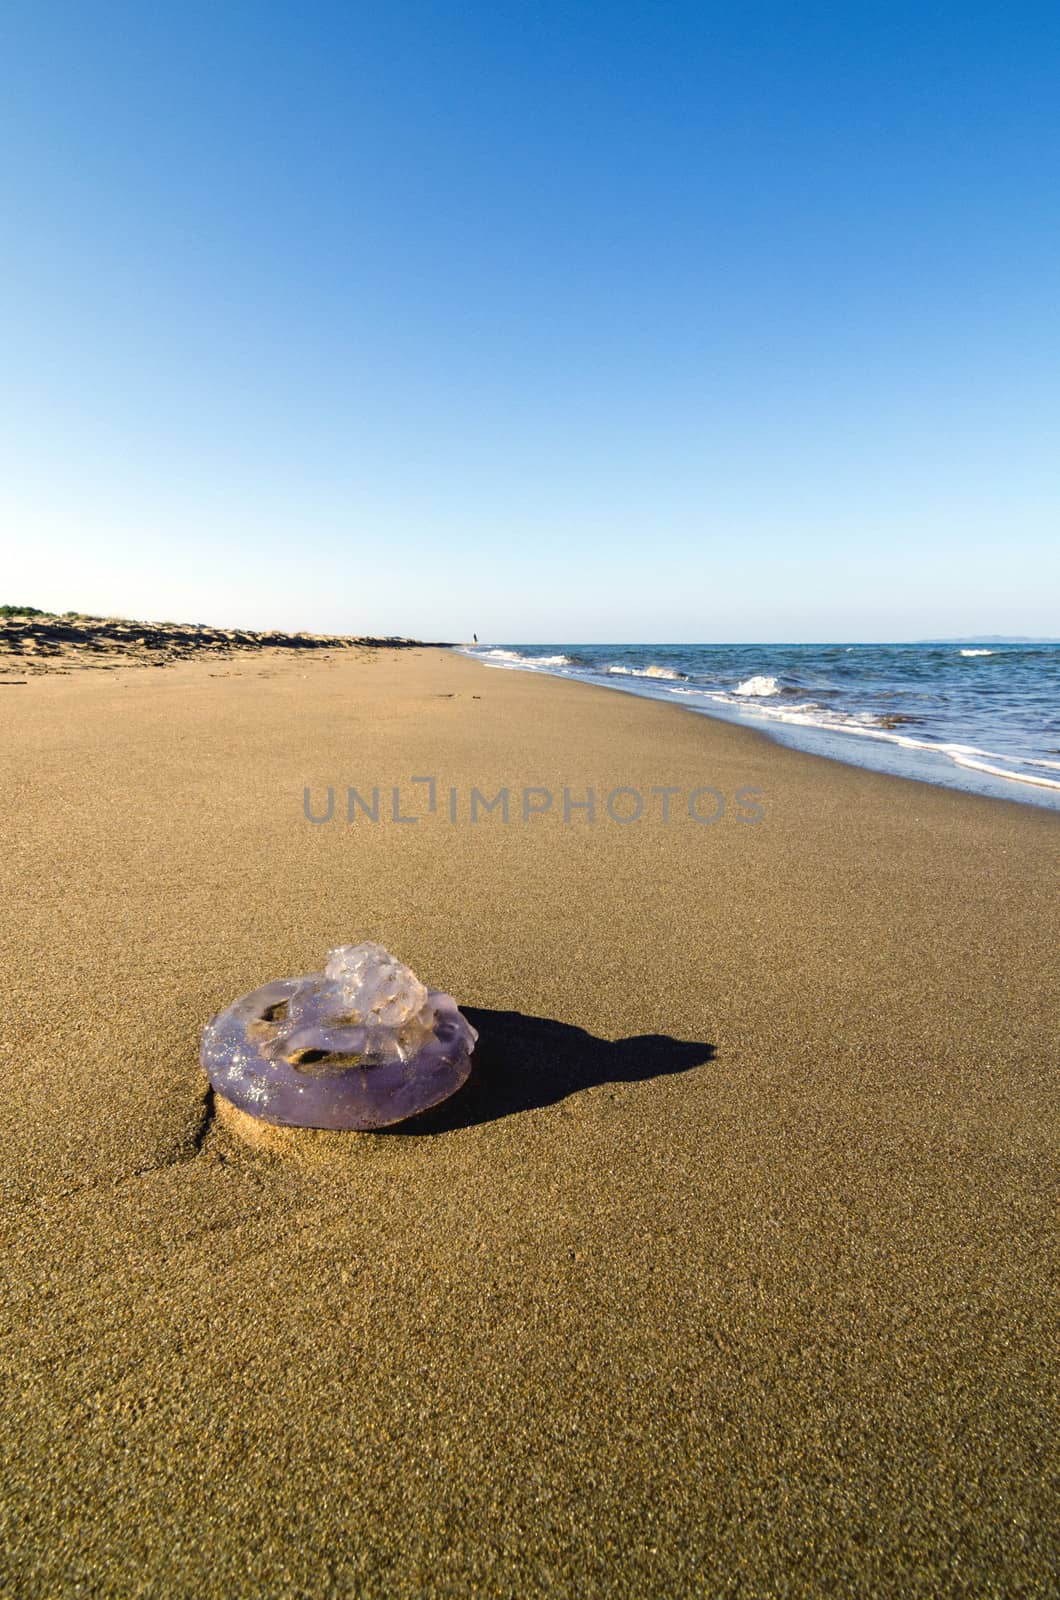 Washed up jellyfish by Anzemulec